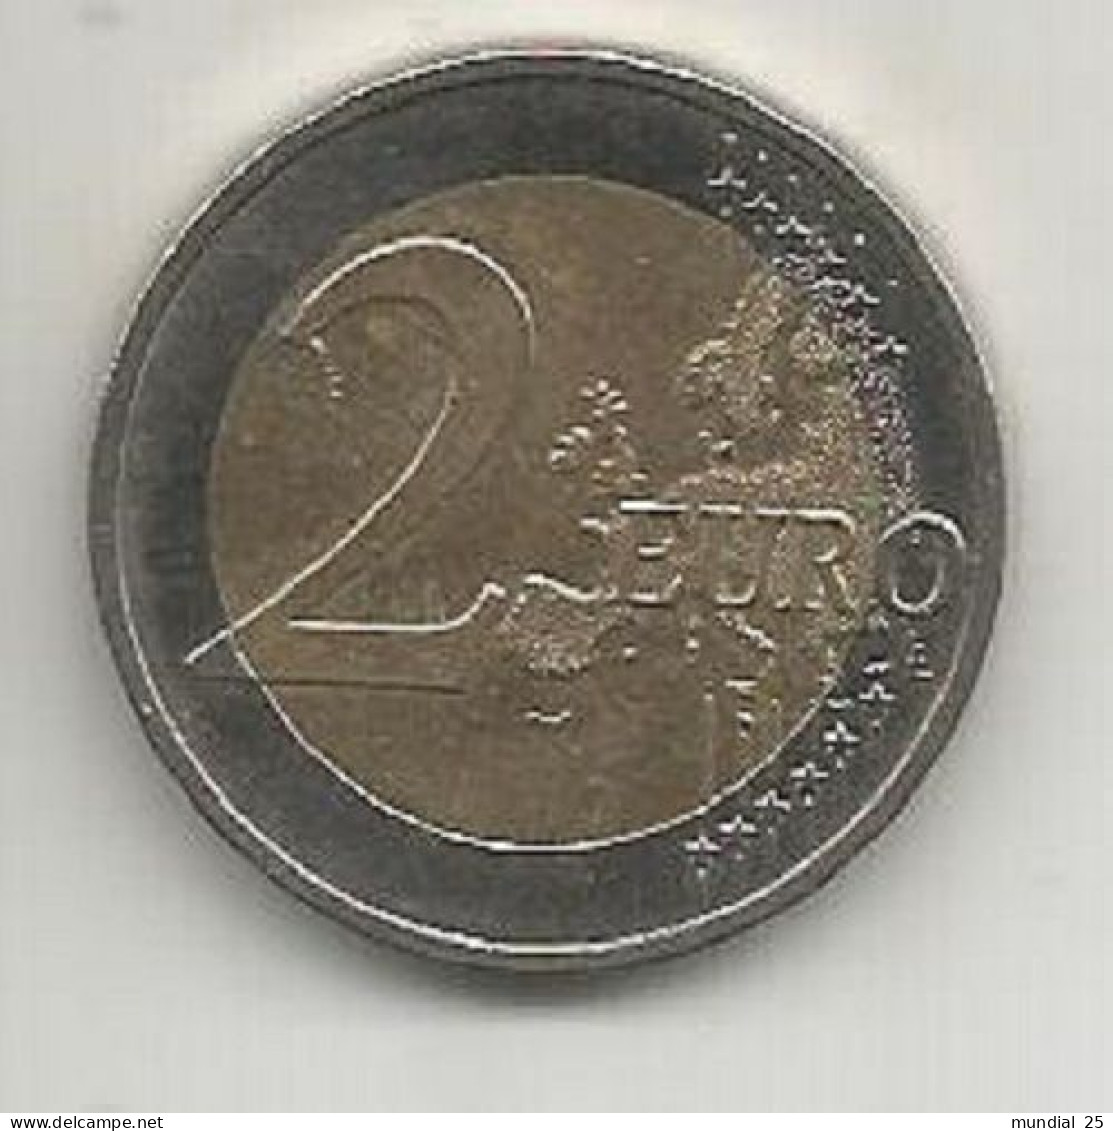 GERMANY 2 EURO 2011 (A) - COLOGNE CATHEDRAL - Germania